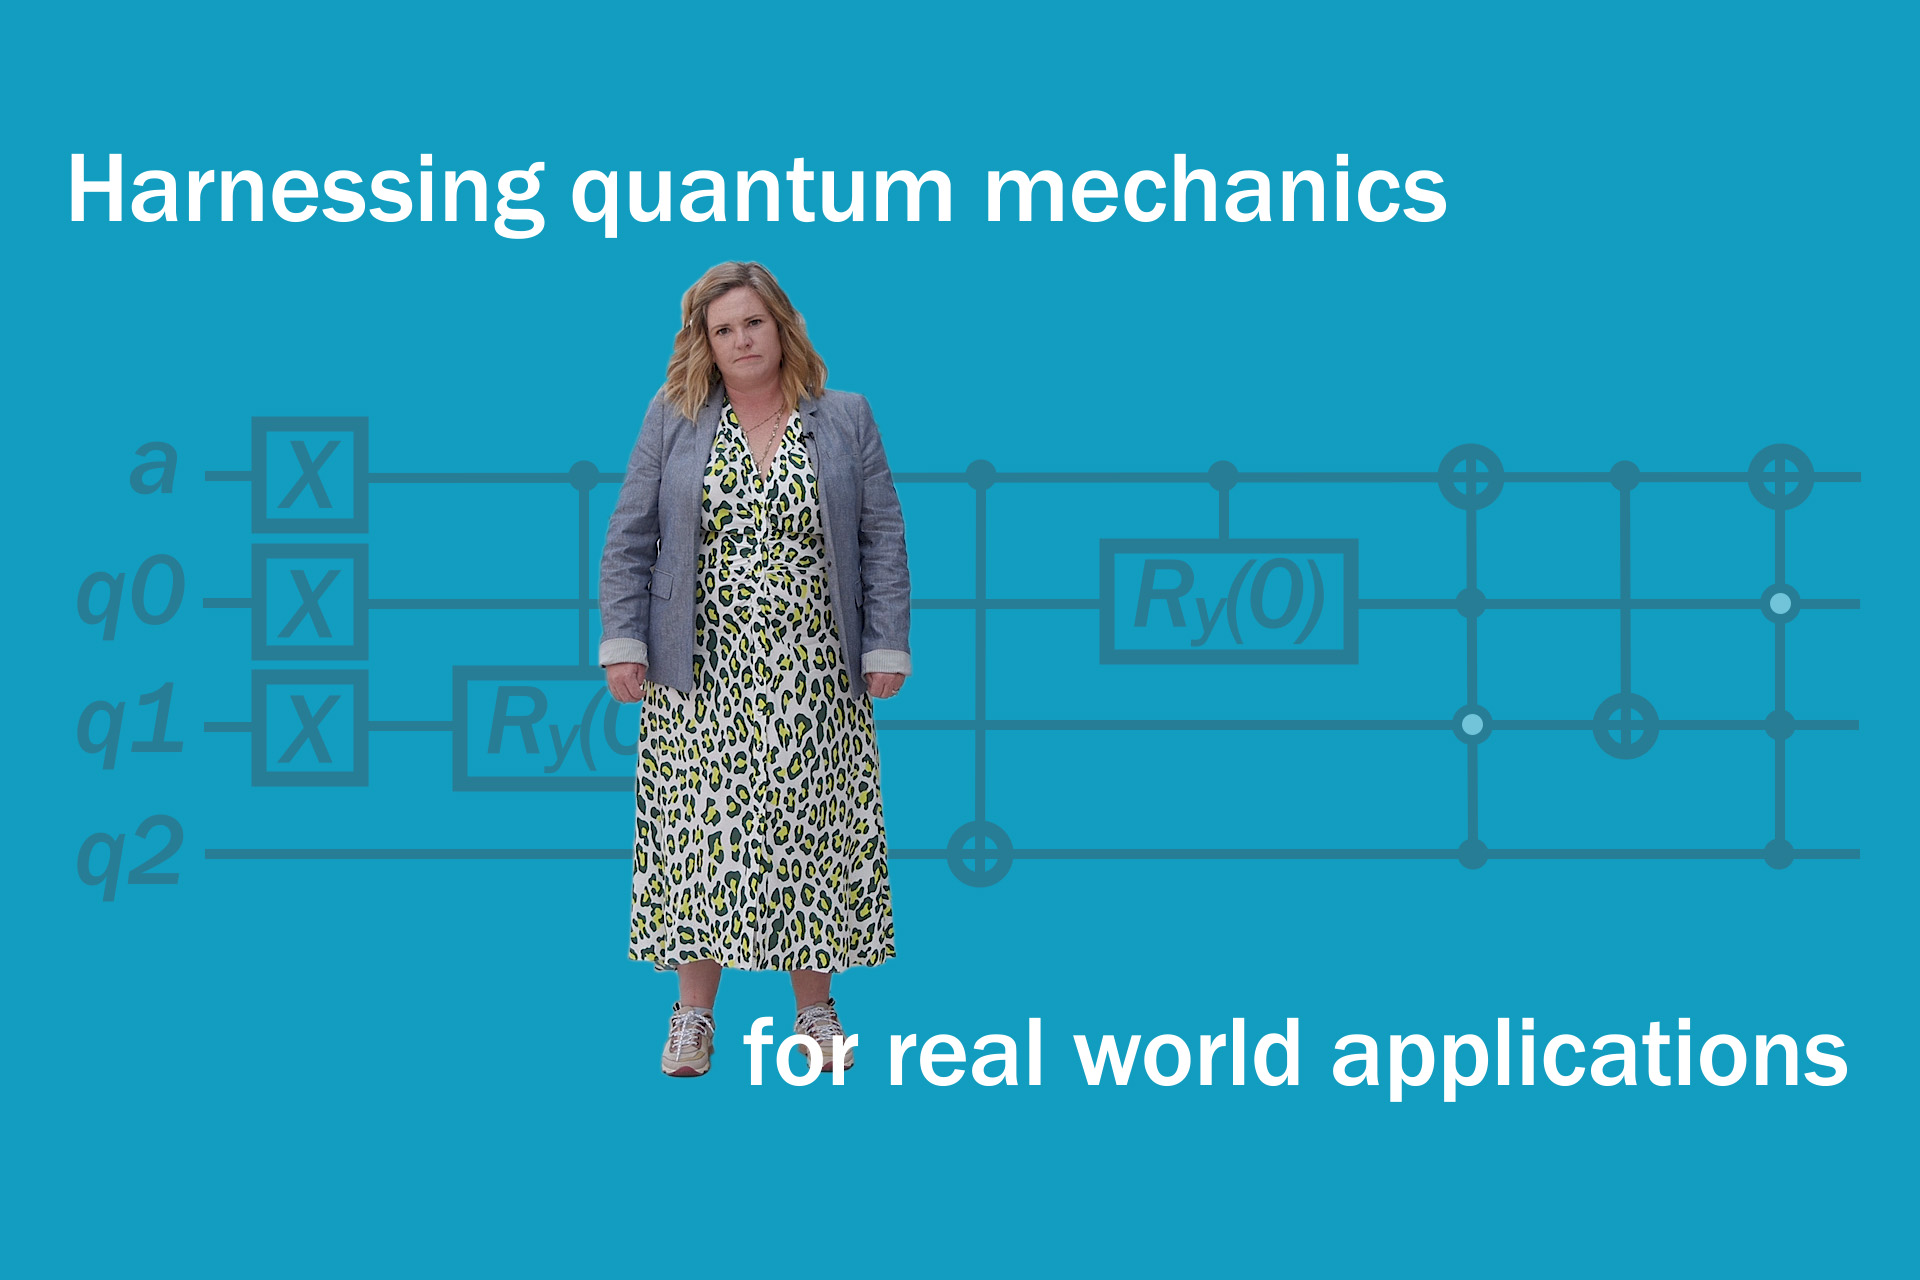 Graphic collage of a person standing in front of a quantum diagram